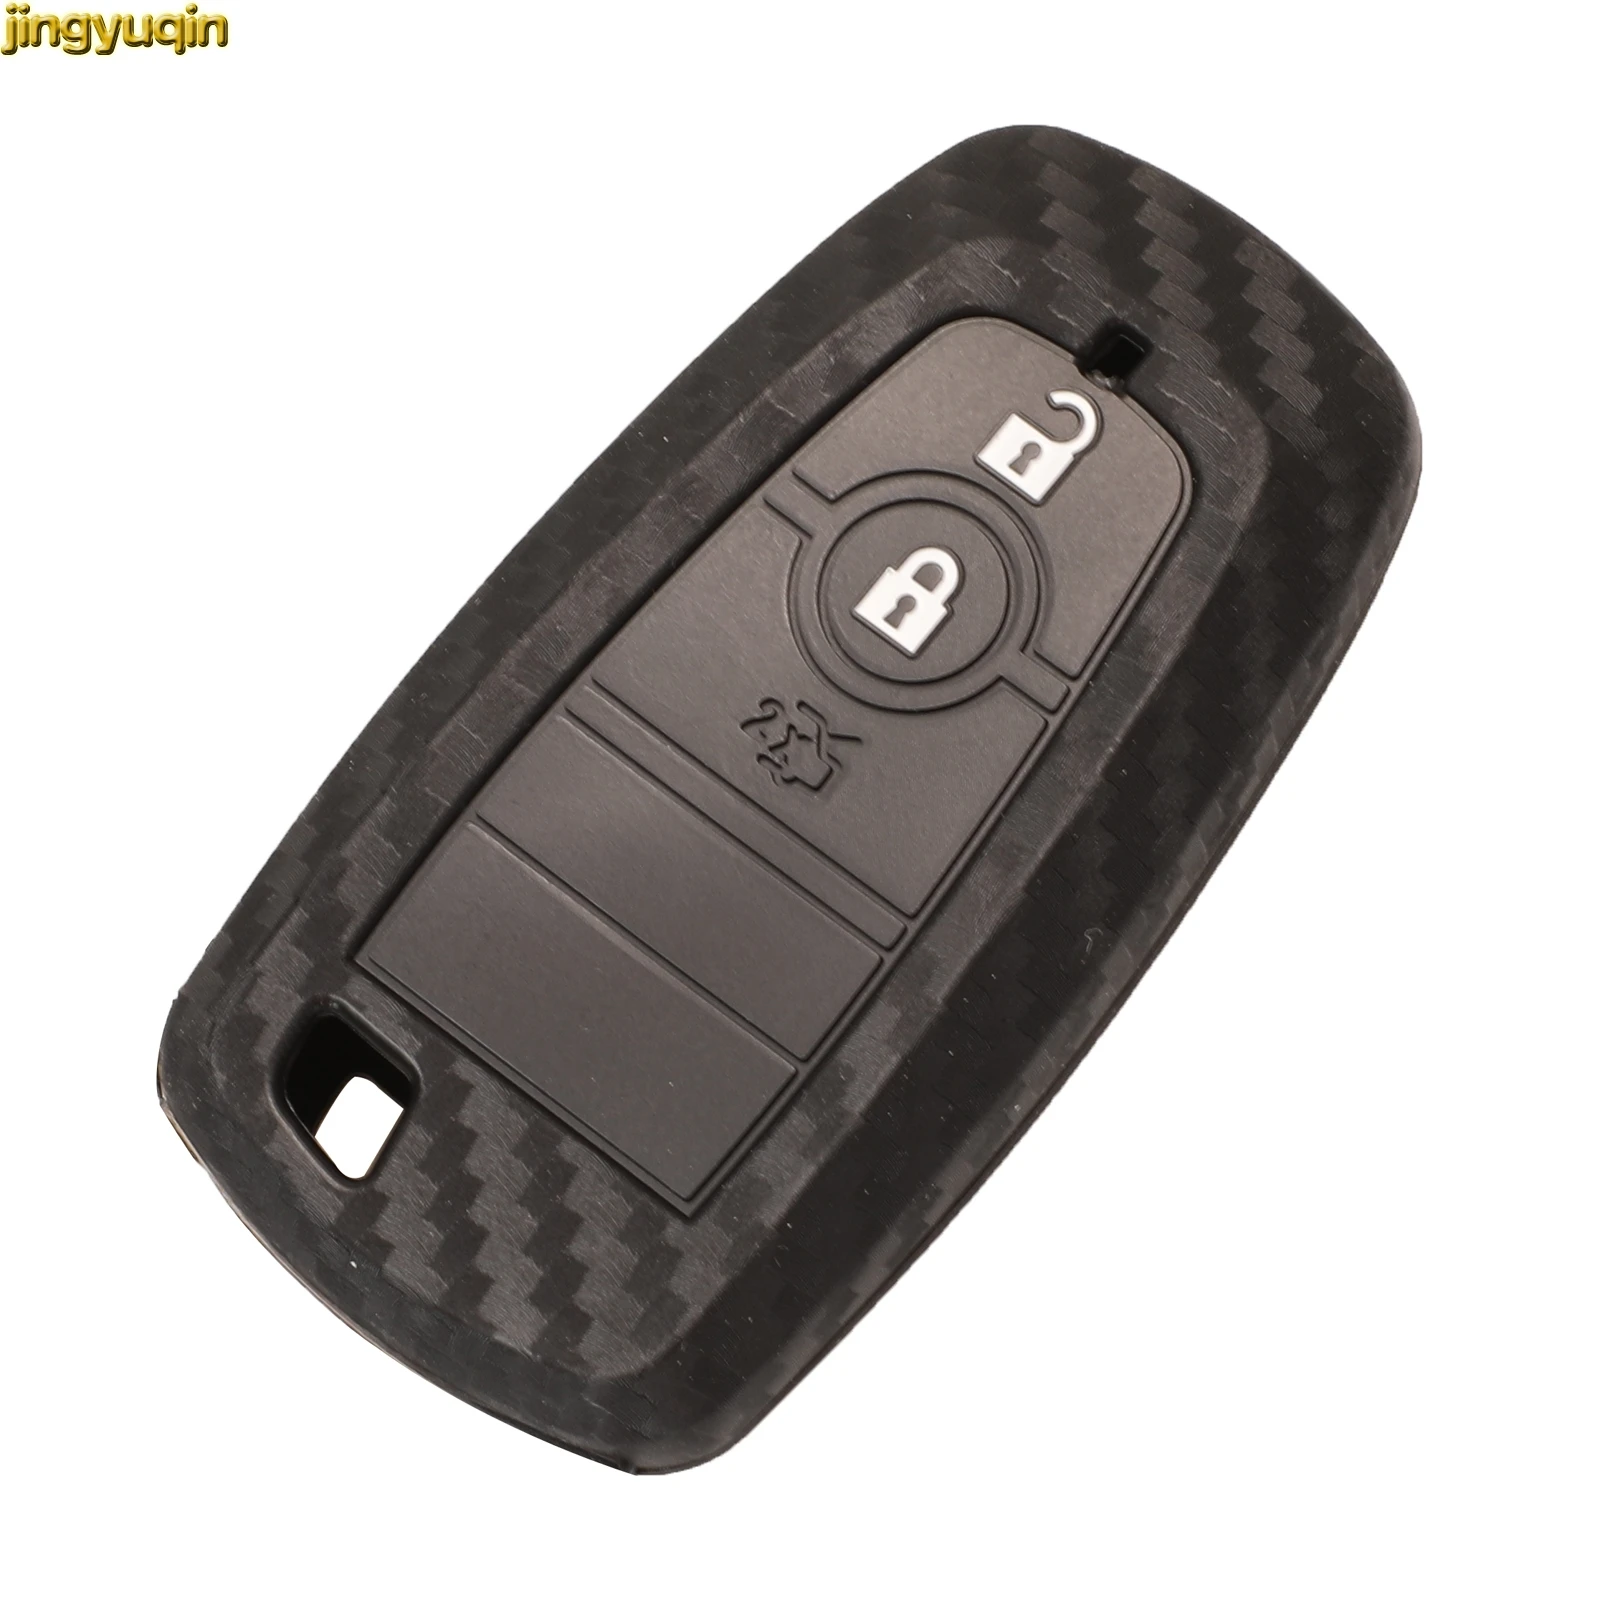 

Jingyuqin Smart Remote Car Key Carbon Silicone Case Cover For Ford Edge Escort Explorer Focus Kuga Mondeo Mustang Taurus 3Button